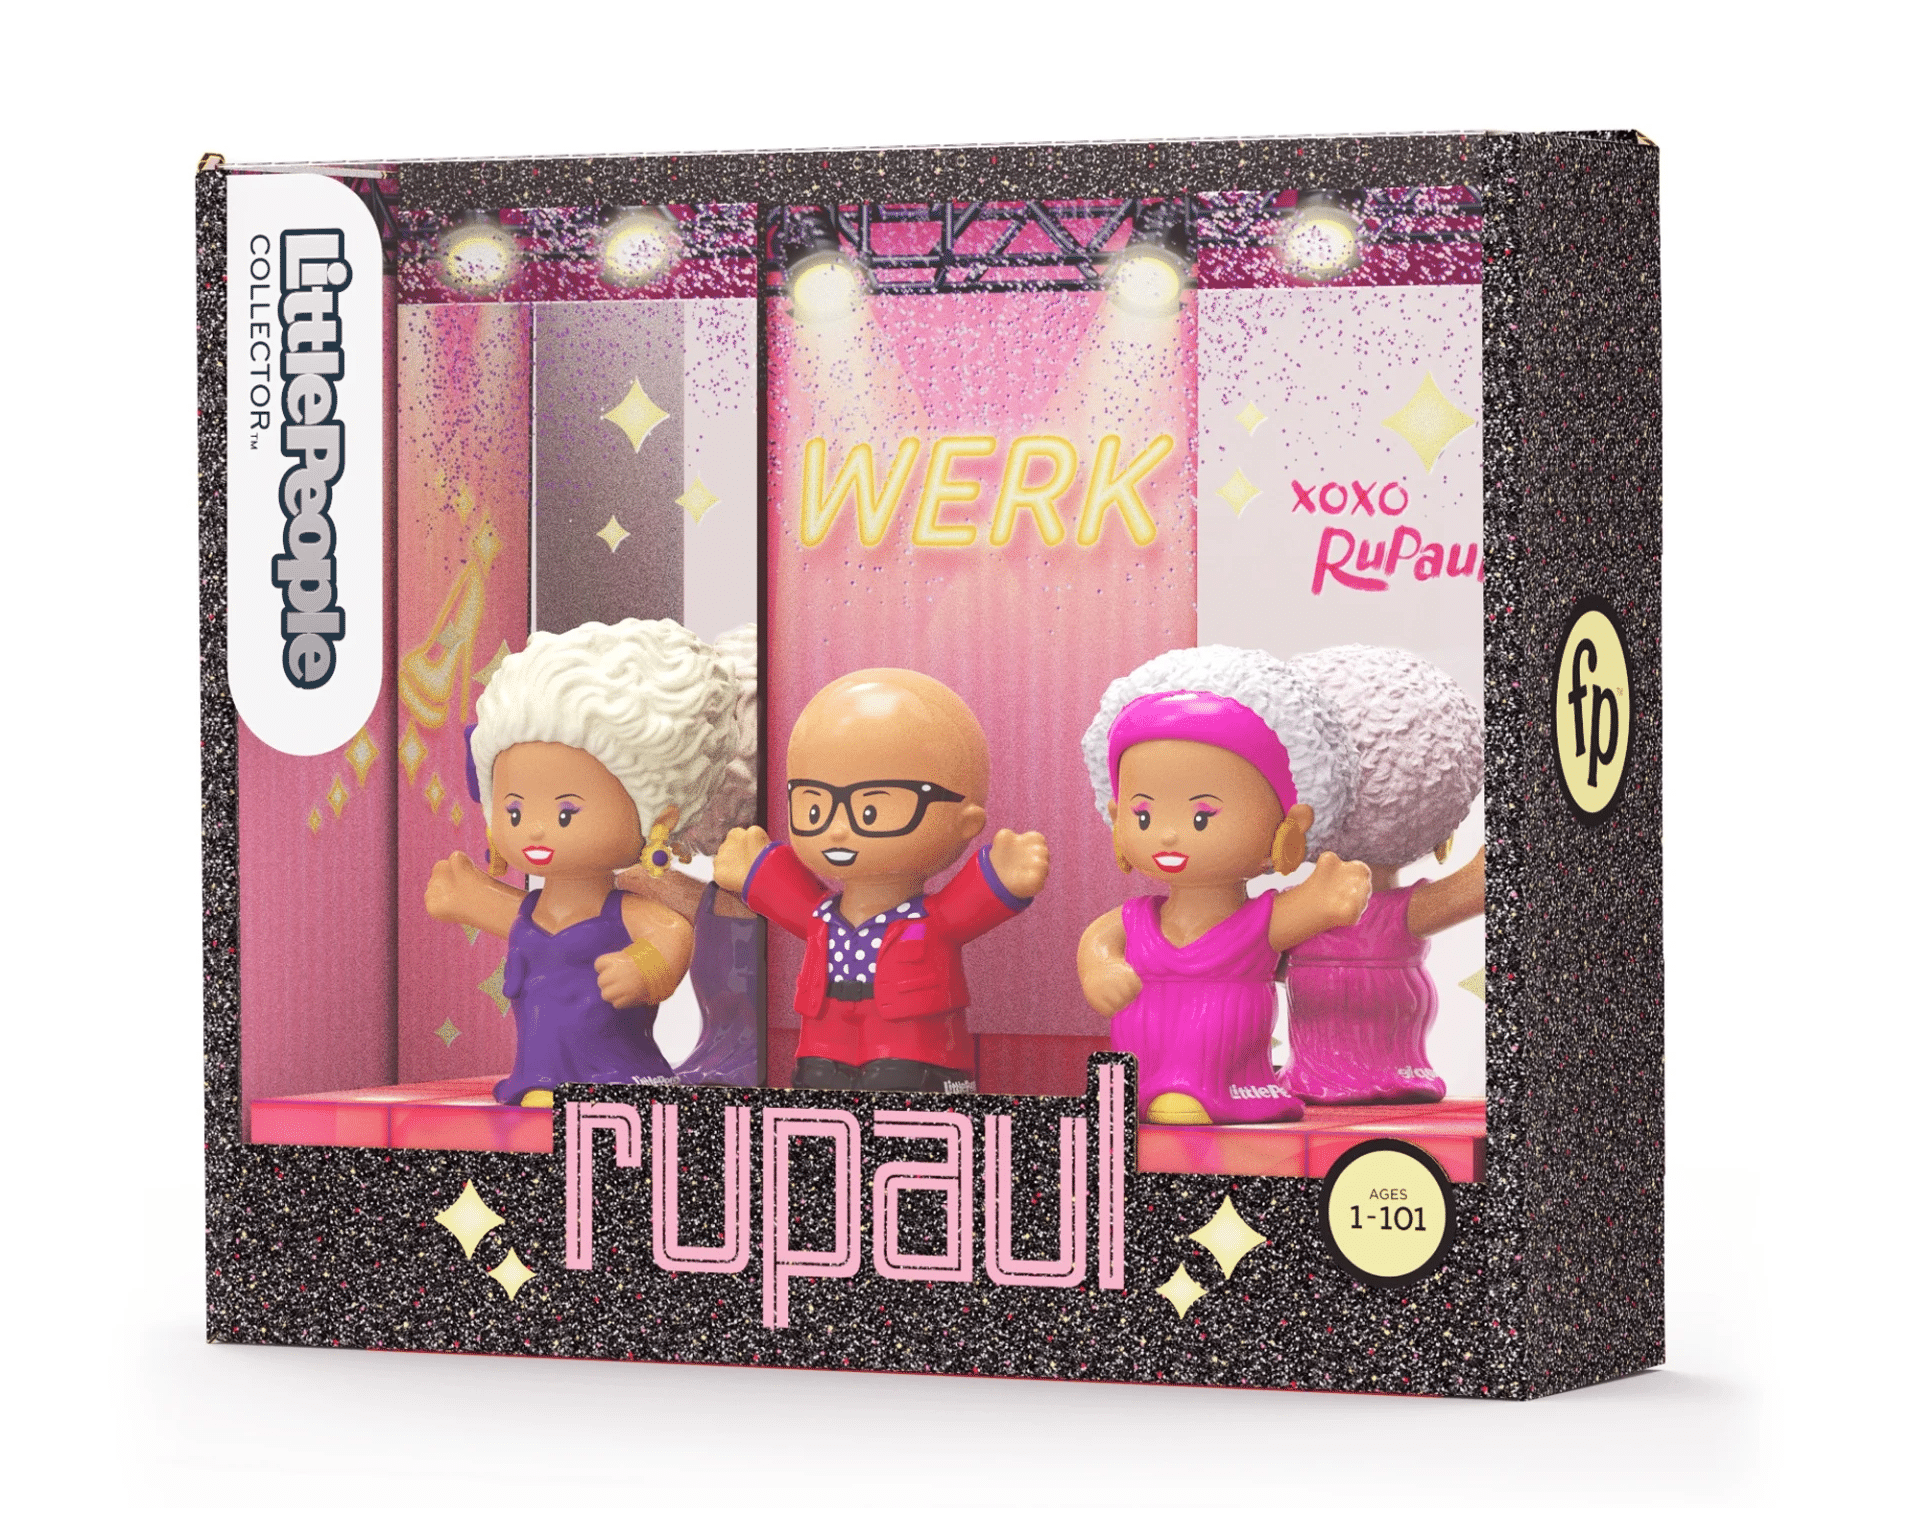 The set features RuPaul in three iconic looks. 